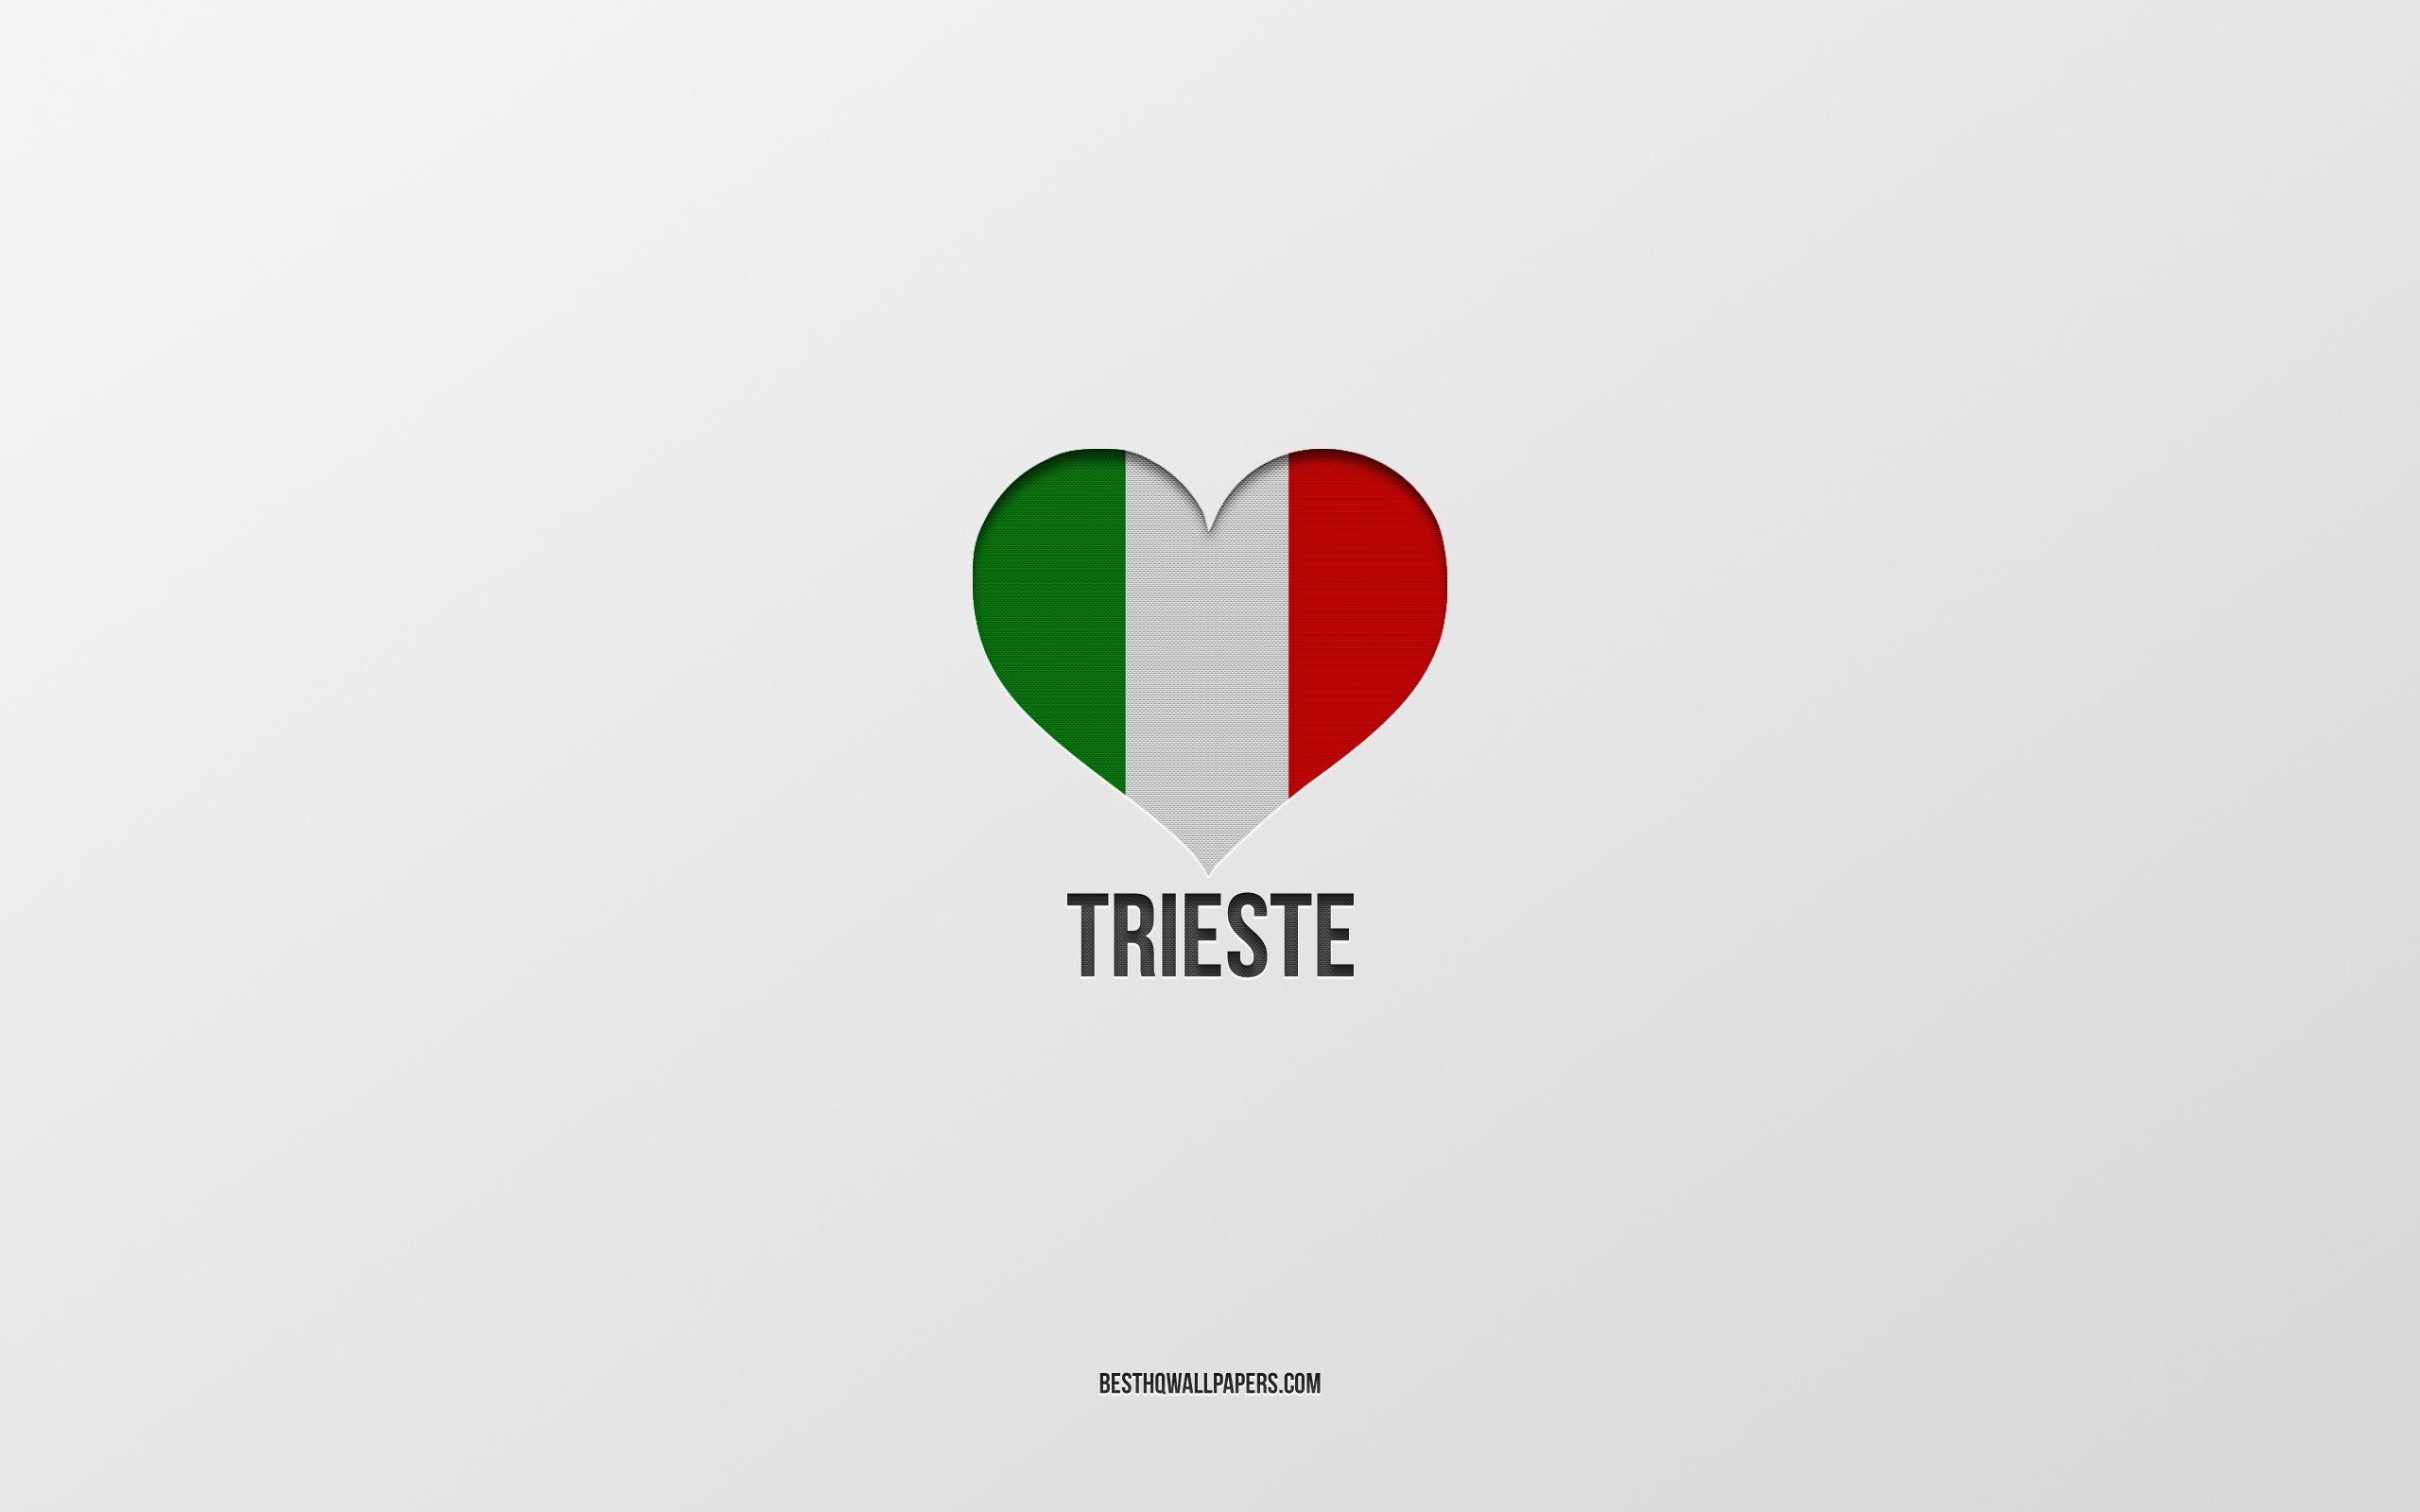 Download wallpaper I Love Trieste, Italian cities, gray background, Trieste, Italy, Italian flag heart, favorite cities, Love Trieste for desktop with resolution 2560x1600. High Quality HD picture wallpaper